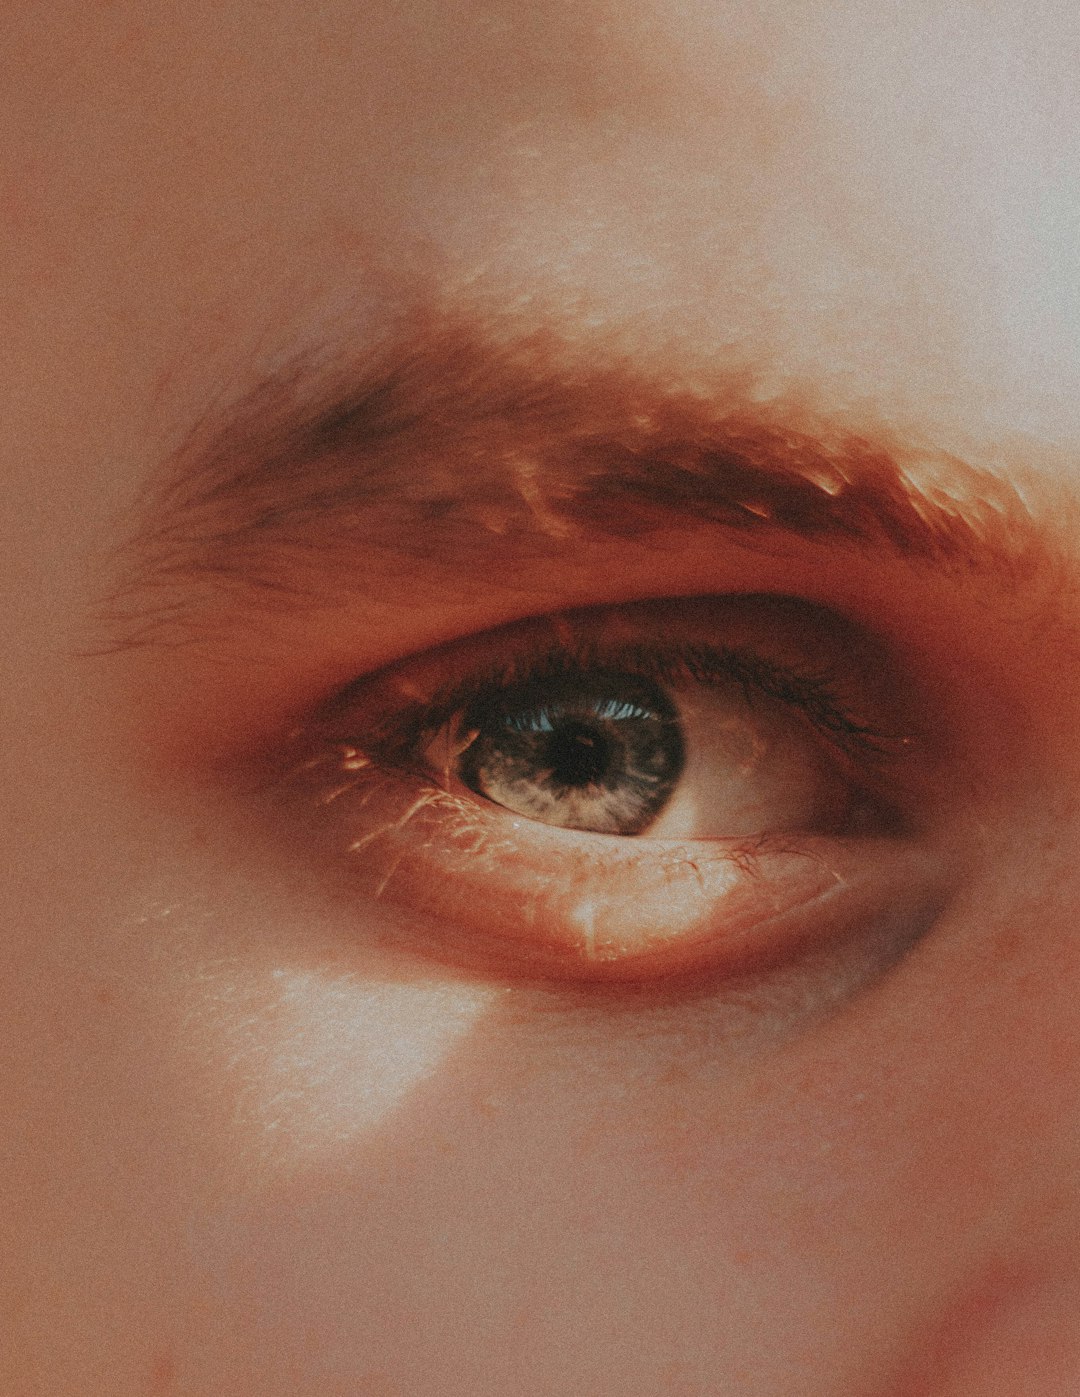 persons eye in close up